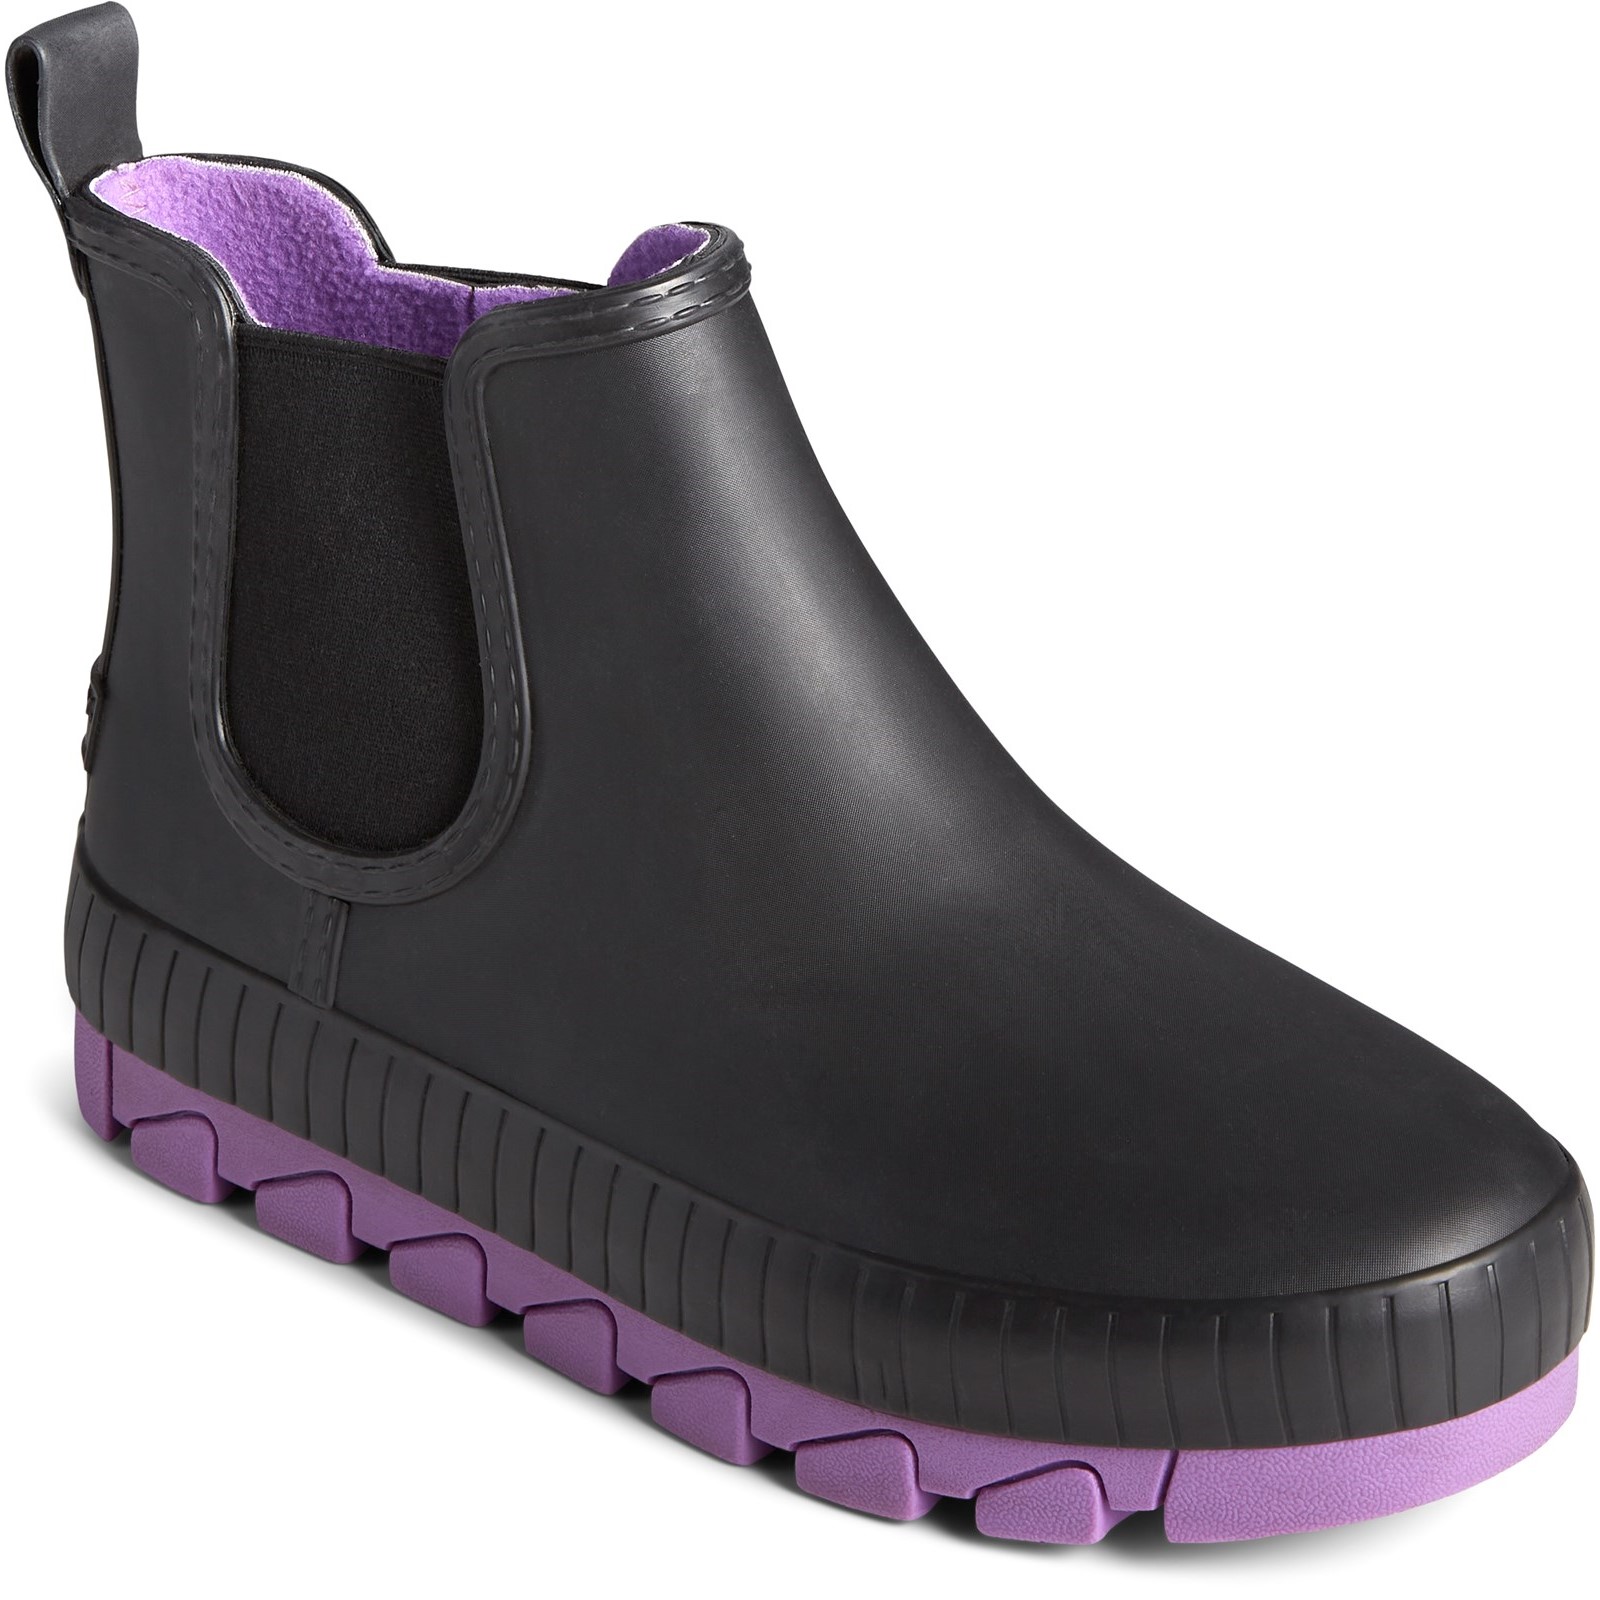 Torrent Chelsea Ankle Boots